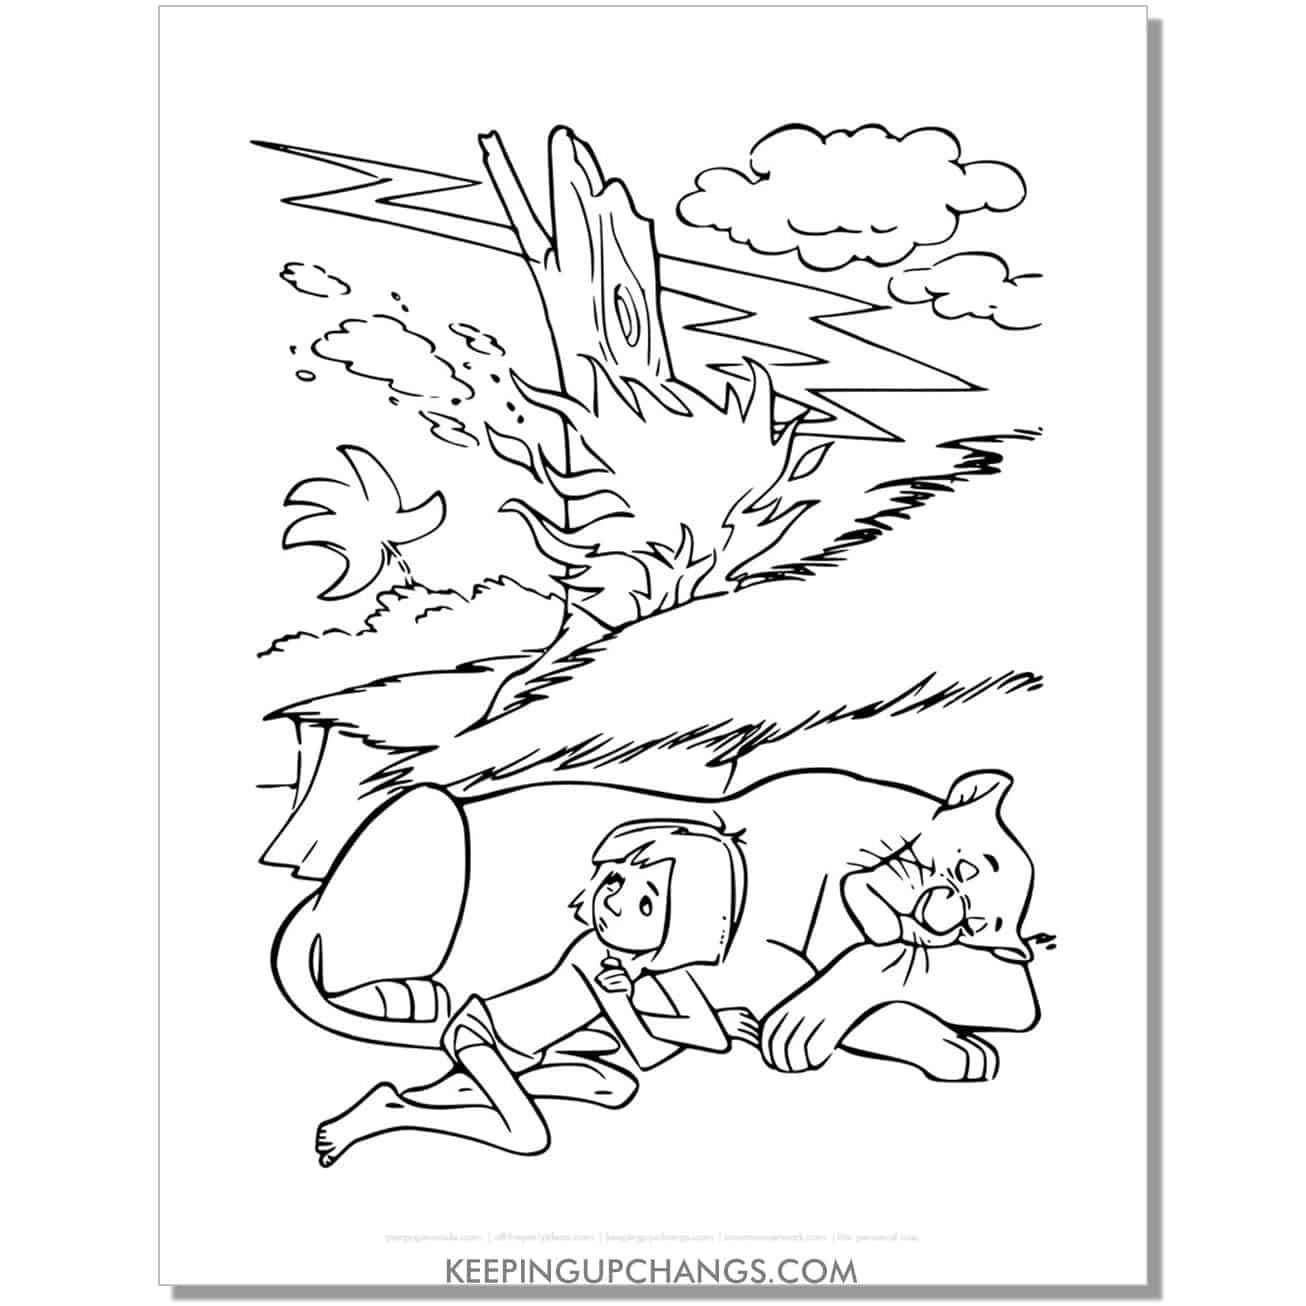 mowgli and bagheera by fire jungle book coloring page, sheet.